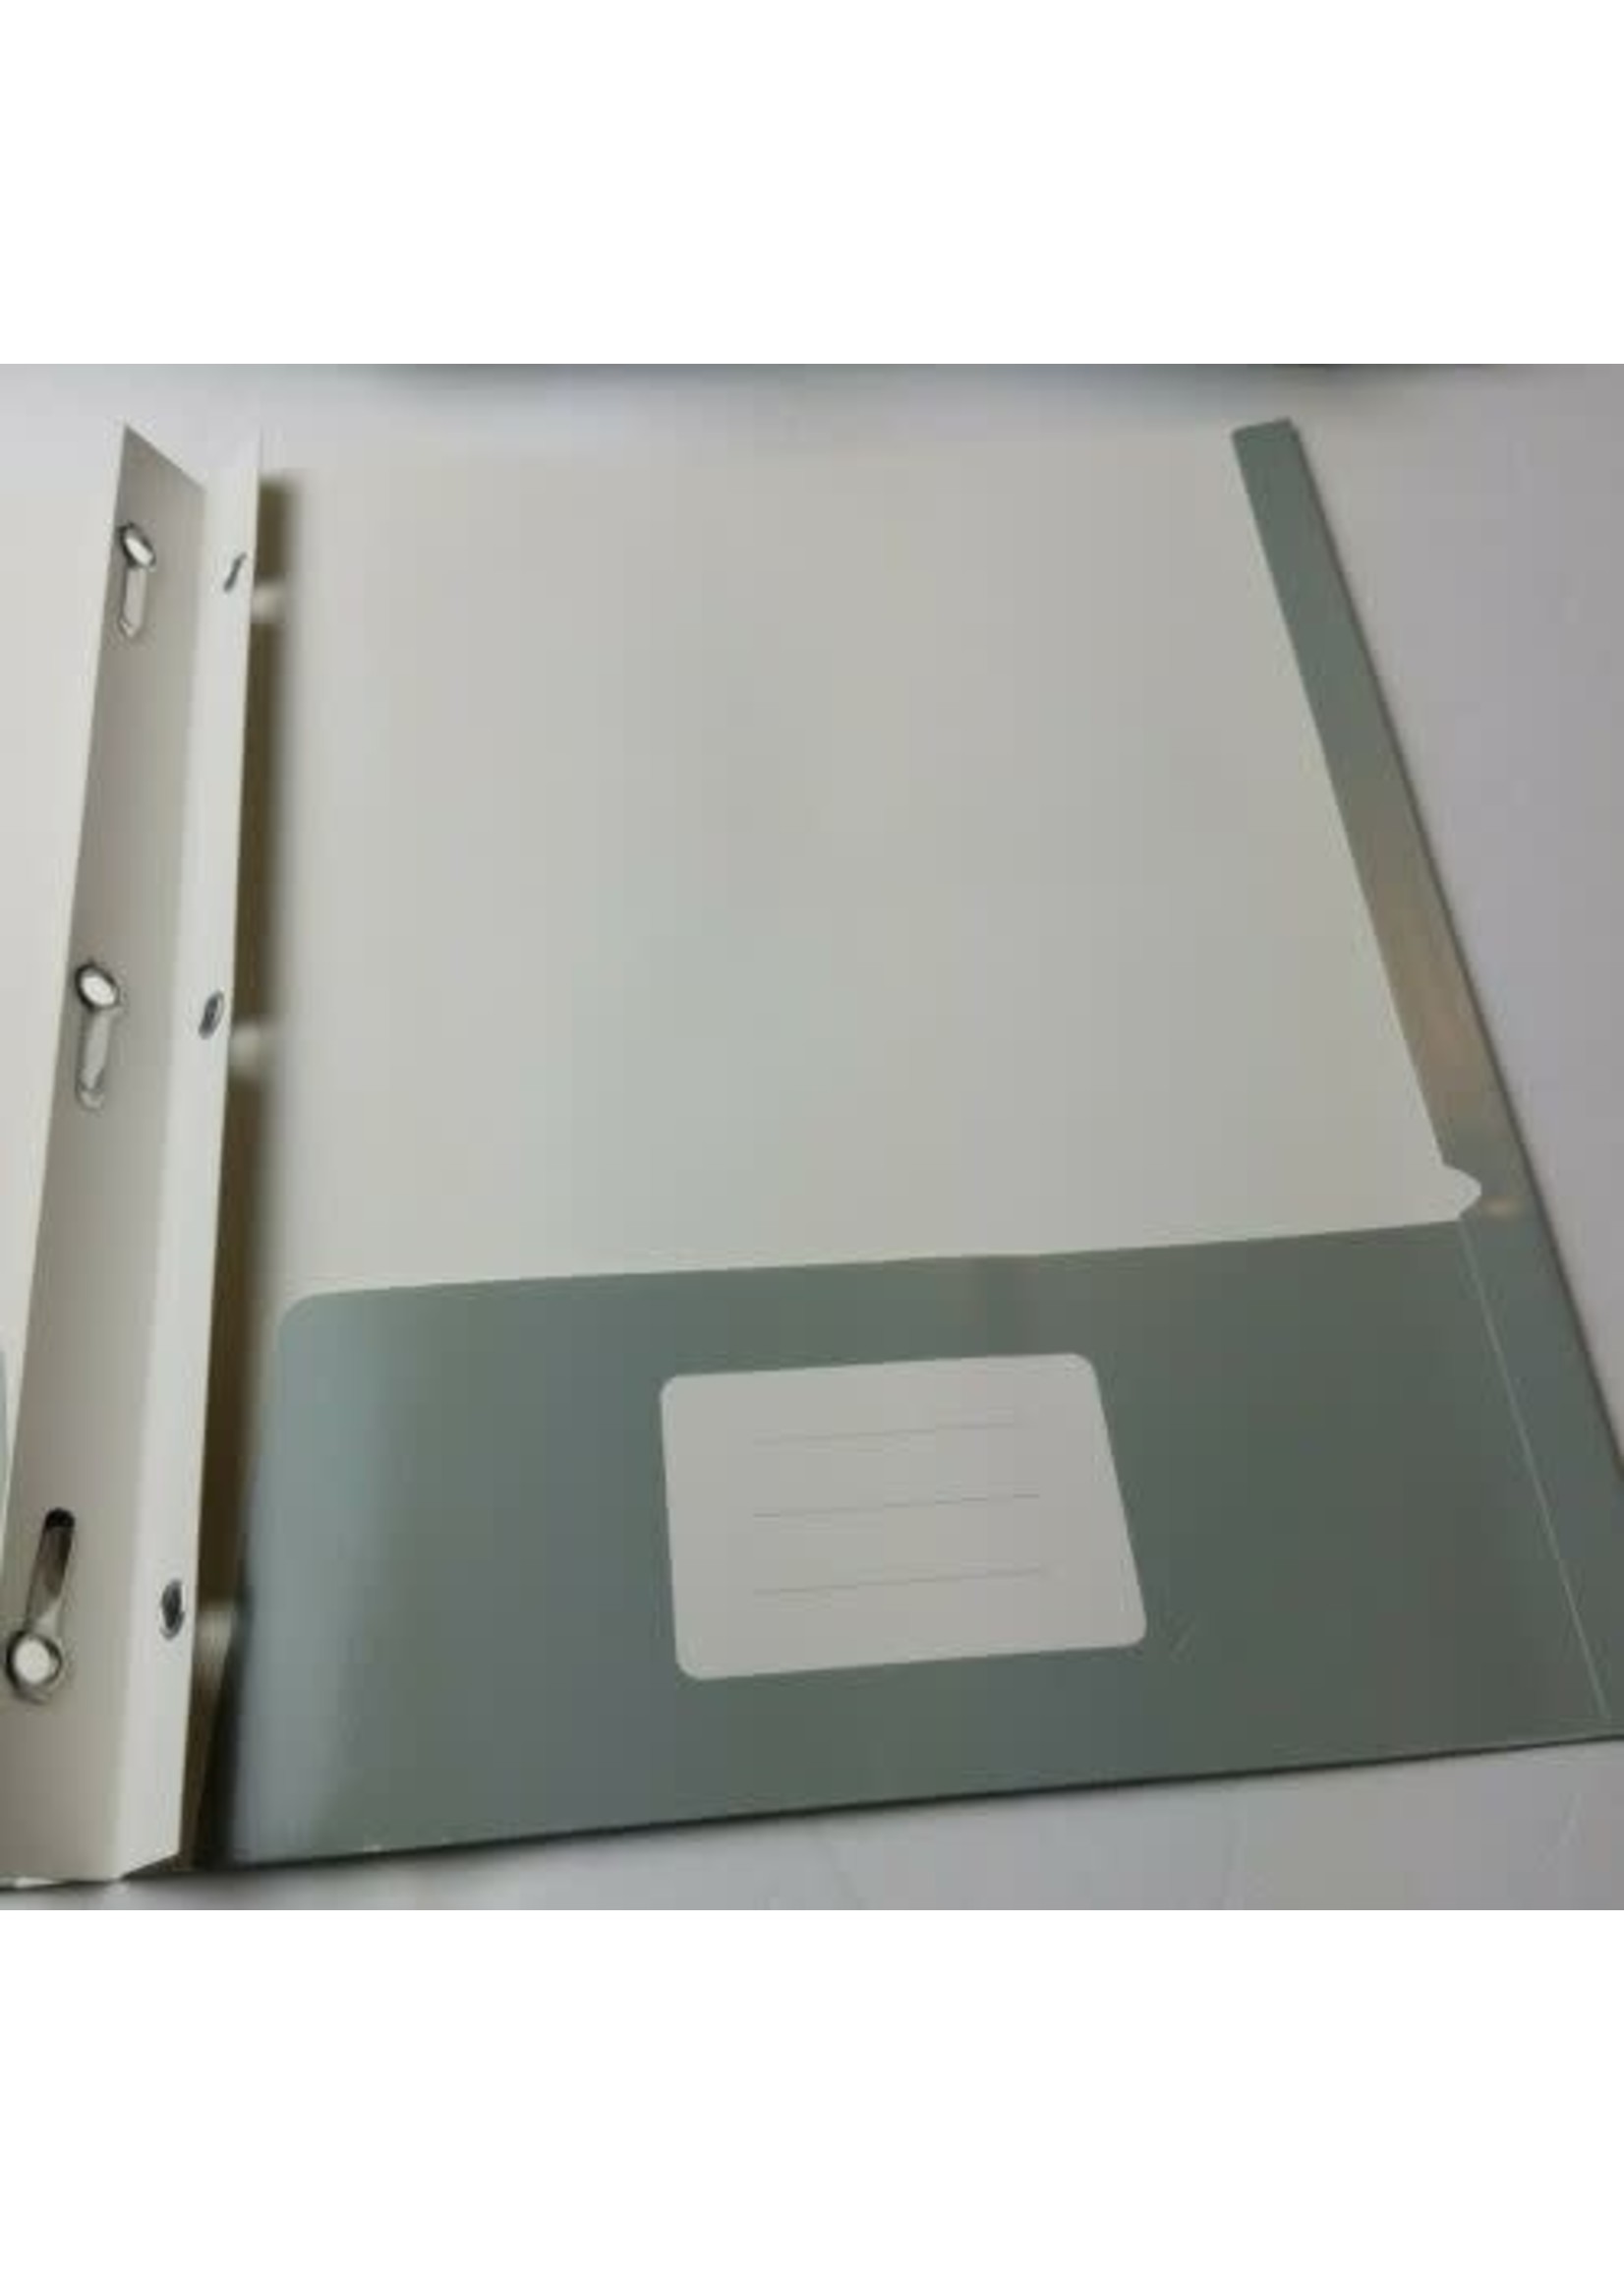 2 Pocket Paper Folder with Prongs Gray - Pallex